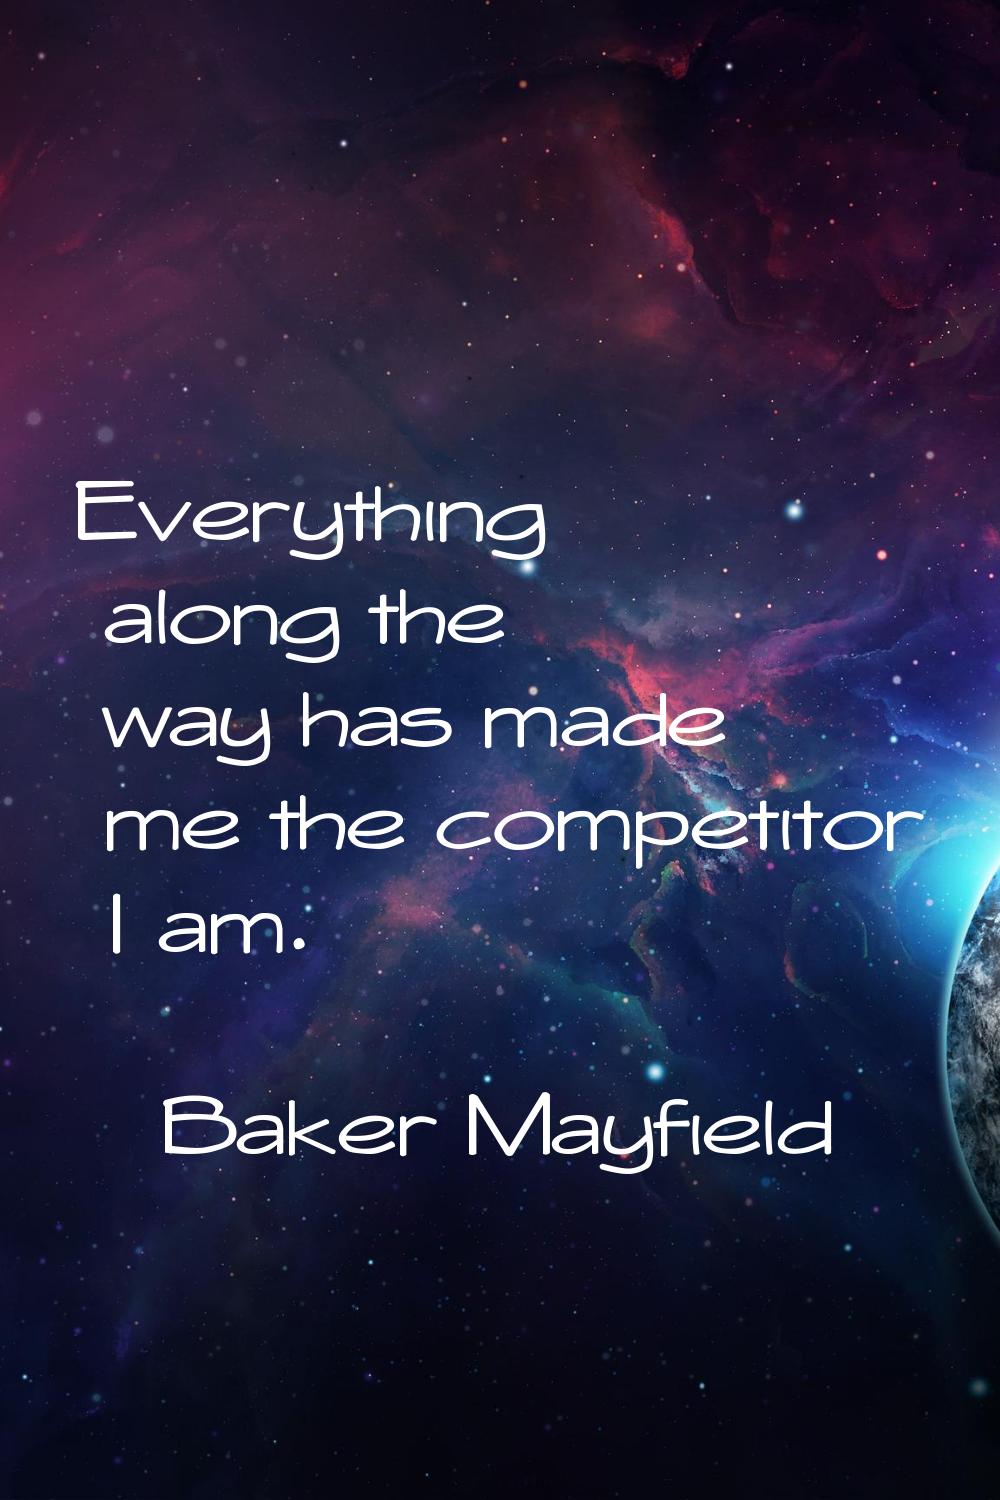 Everything along the way has made me the competitor I am.